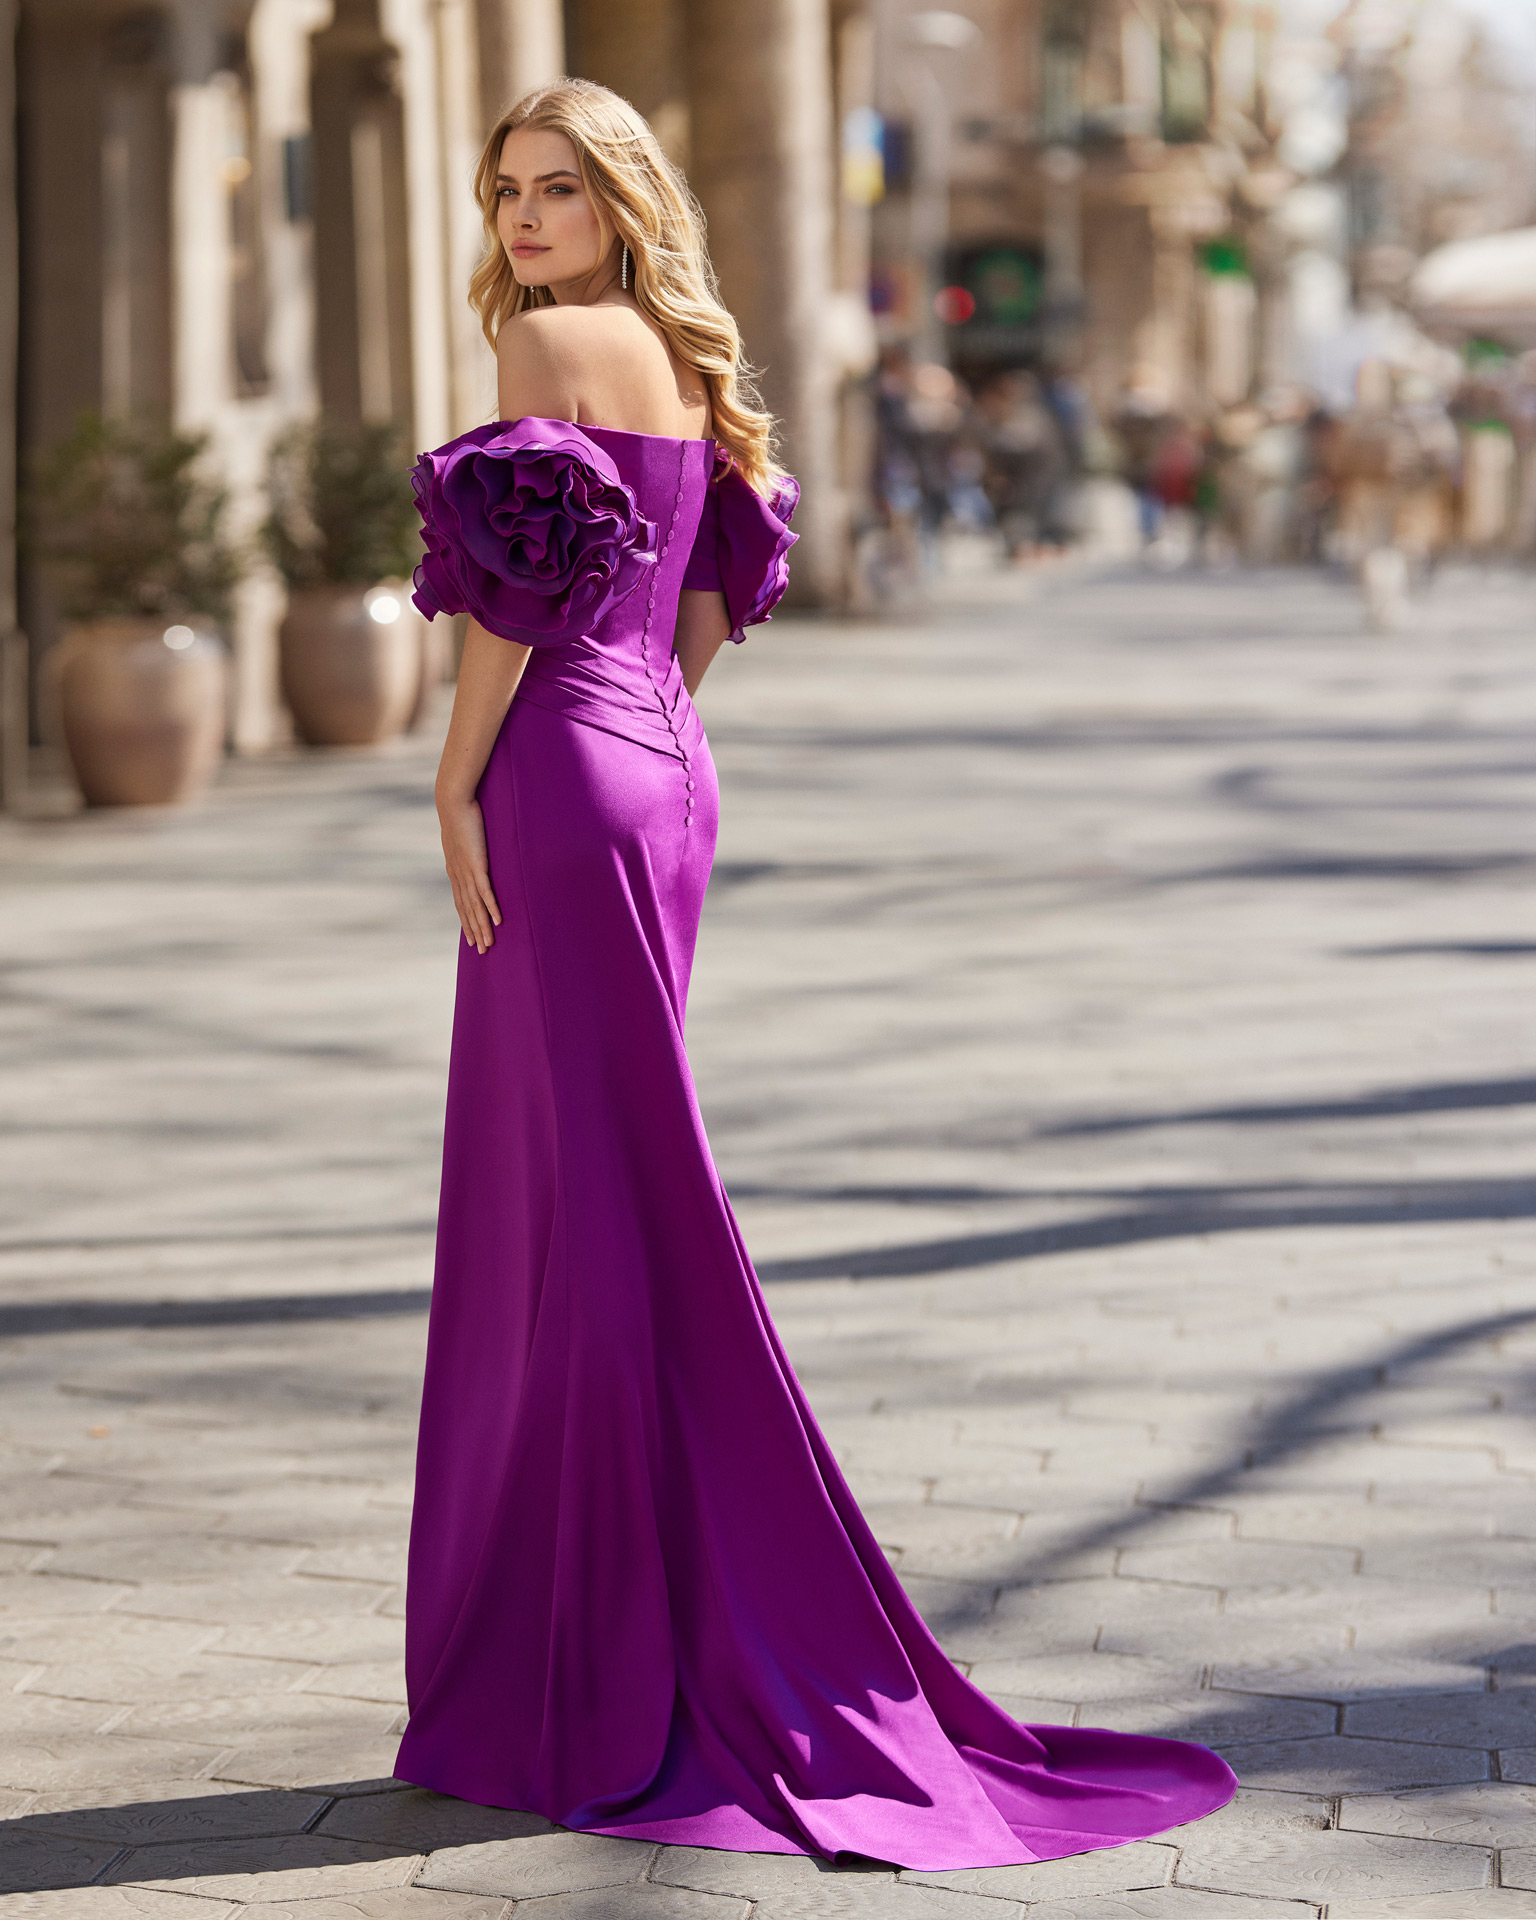 Elegant long evening dress, made of satin crepe. Marfil Barcelona design with a sweetheart neckline and puffed sleeves. MARFIL_BARCELONA.